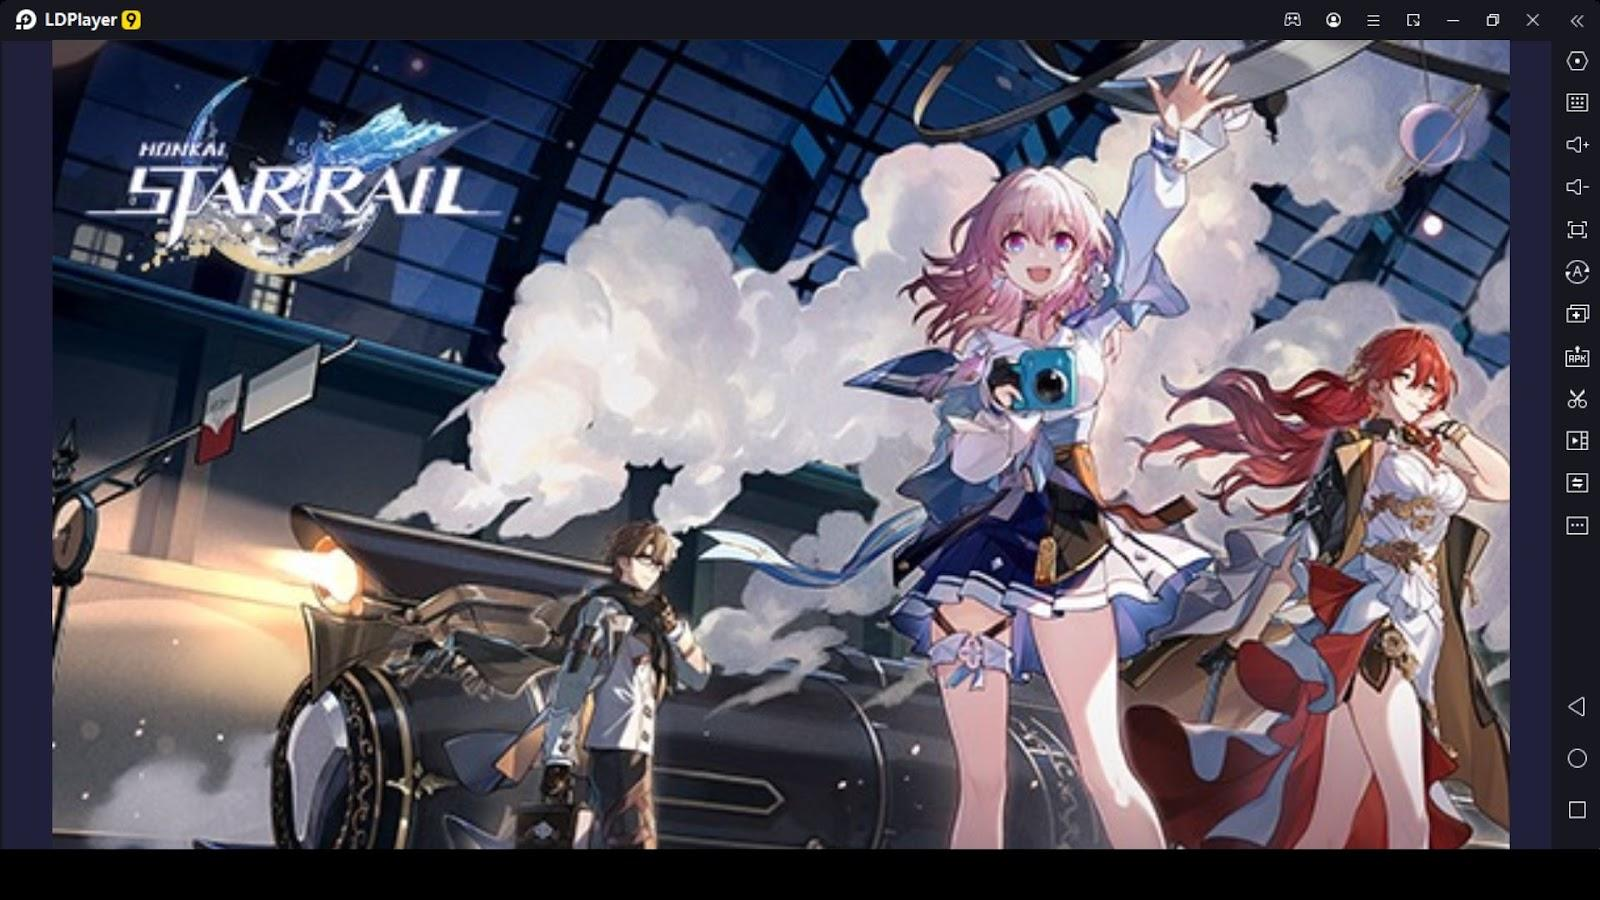 How to Play Honkai Star Rail on PC With LDPlayer 9